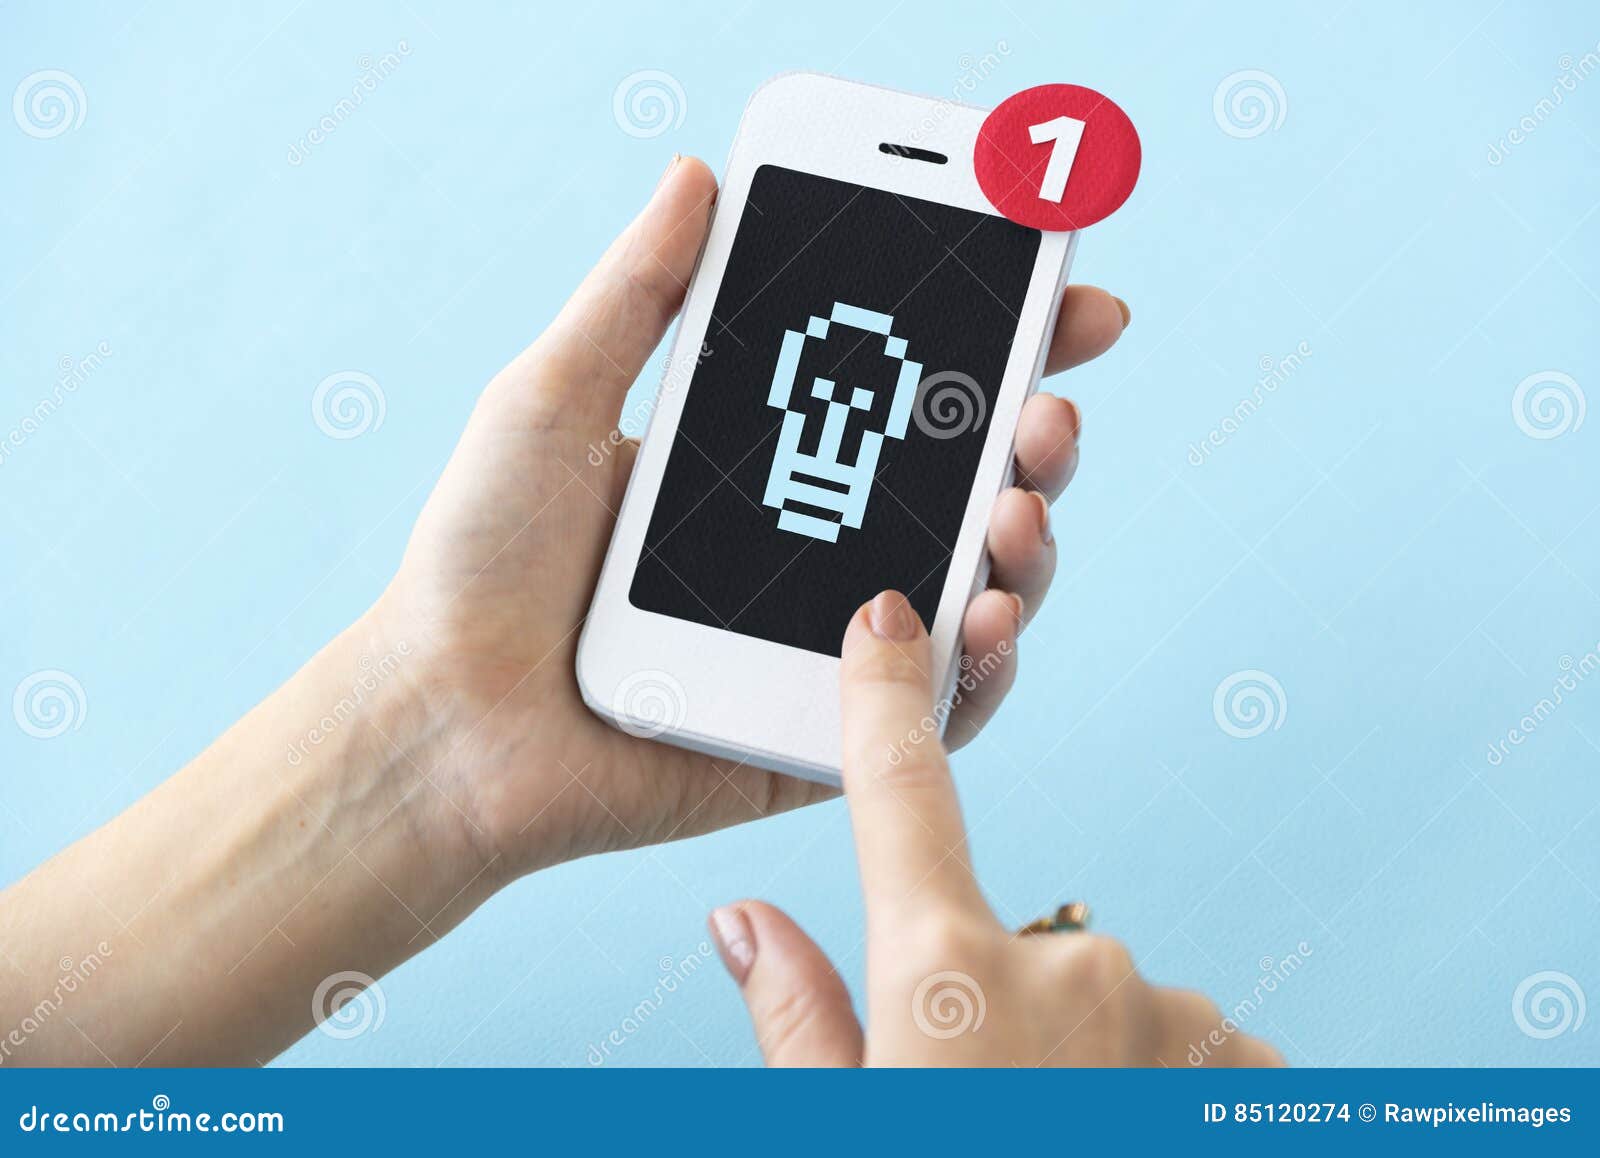 Gadget Application Technology Icon Concept Stock Photo - Image of